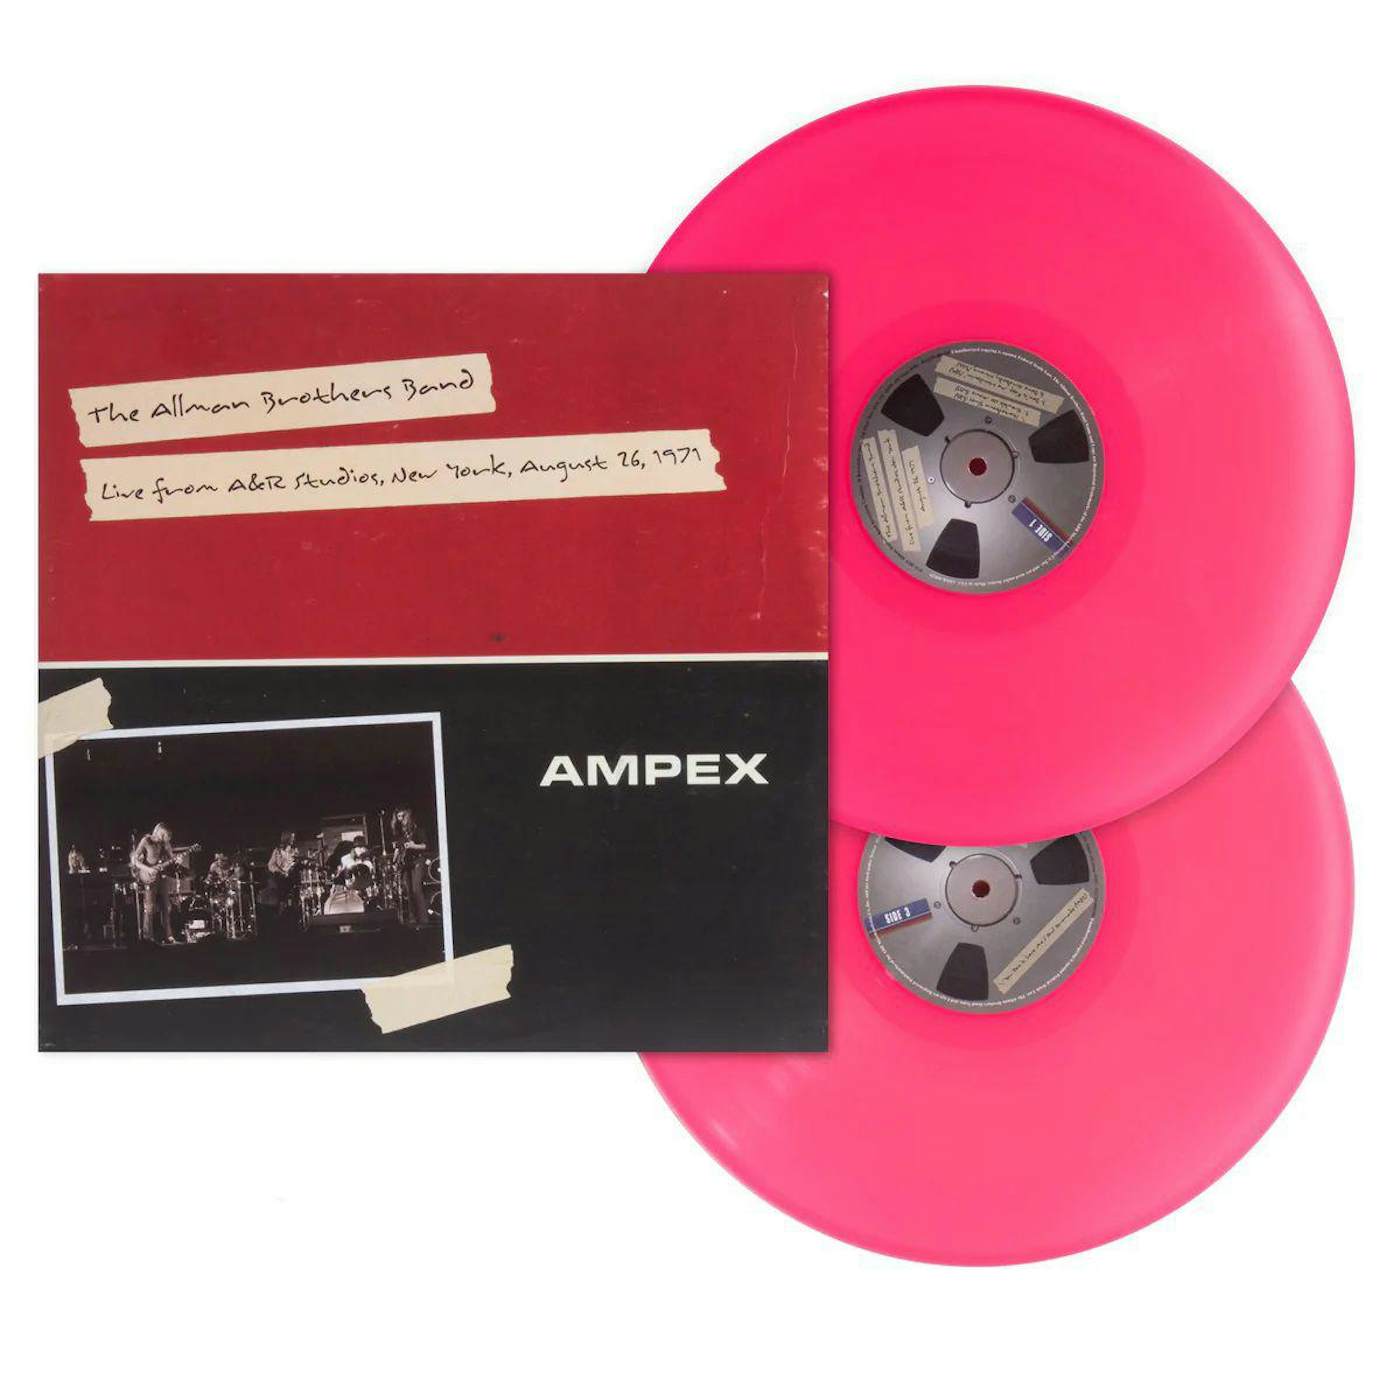 Allman Brothers Band LIVE FROM A&R STUDIOS NEW YORK AUGUST 26 1971 (PINK VINYL/140G/2LP) (TEN BANDS ONE CAUSE) Vinyl Record